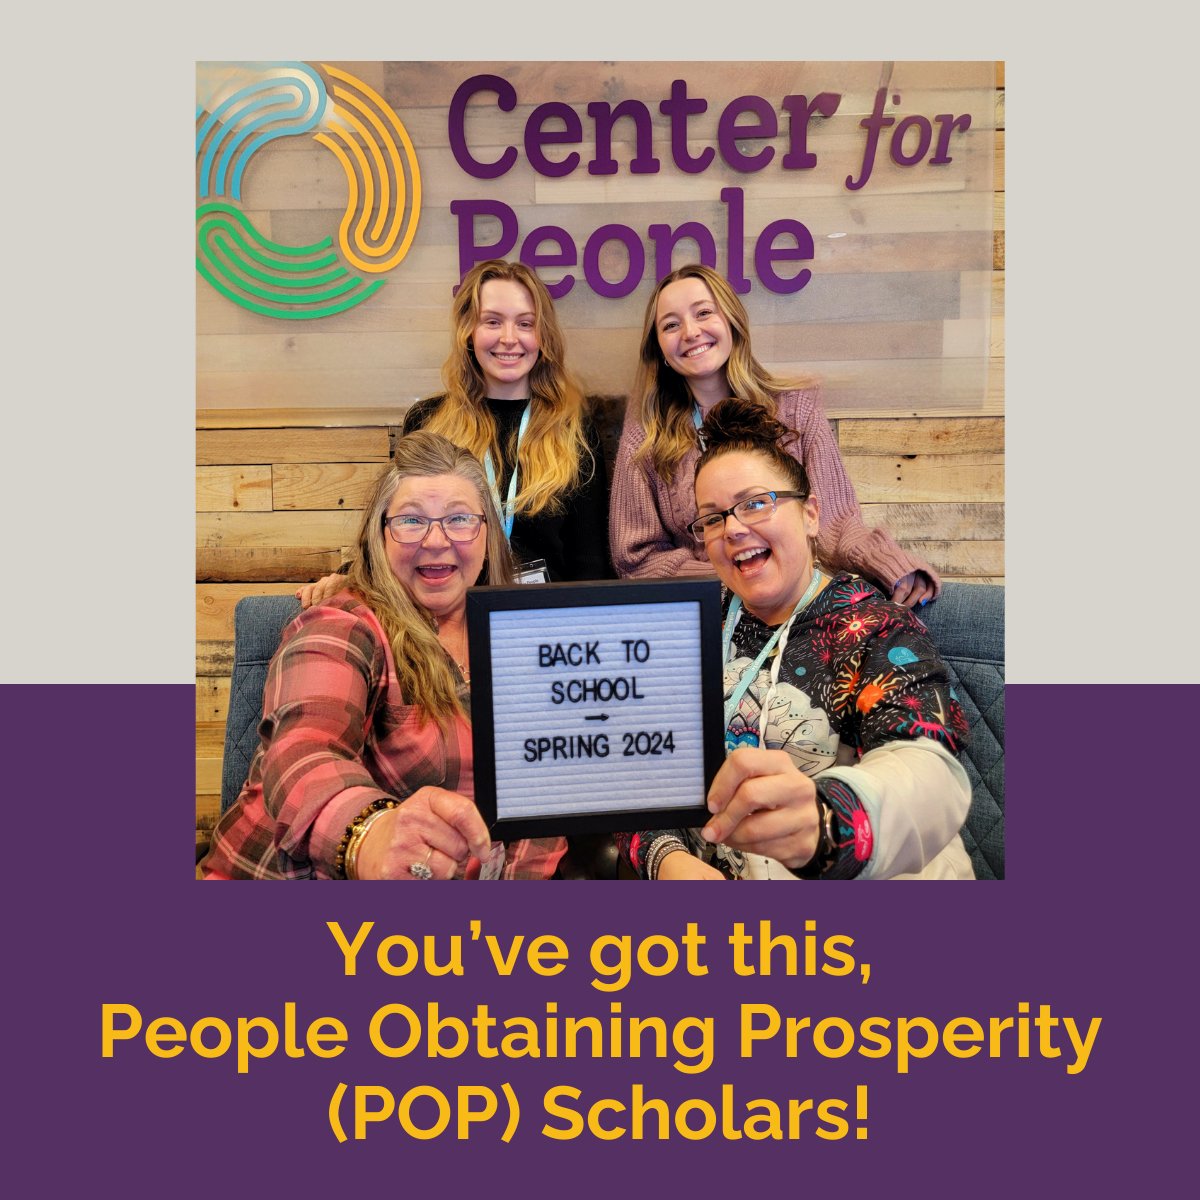 As our People Obtaining Prosperity (POP) Scholars return to SCC for the second semester, our Career Development Specialists offer a shout out. Classes start Monday. You've got this, scholars. And we've got you! #centerforpeople #education&training #southeastcommunitycollege